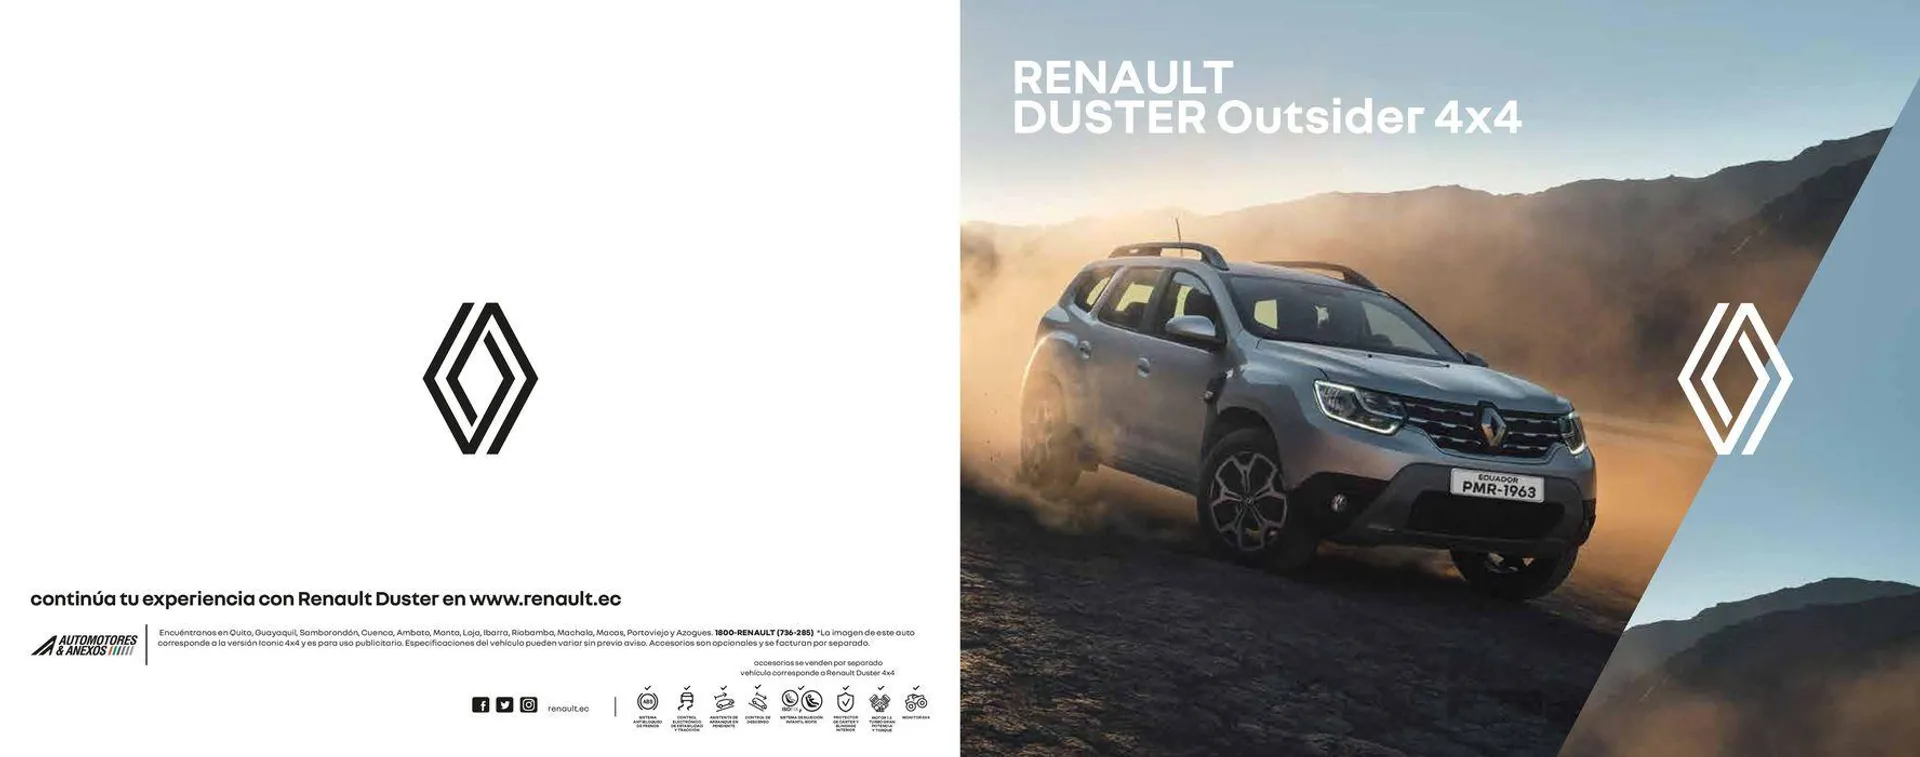 Renault DUSTER Outsider 4x4 - 1